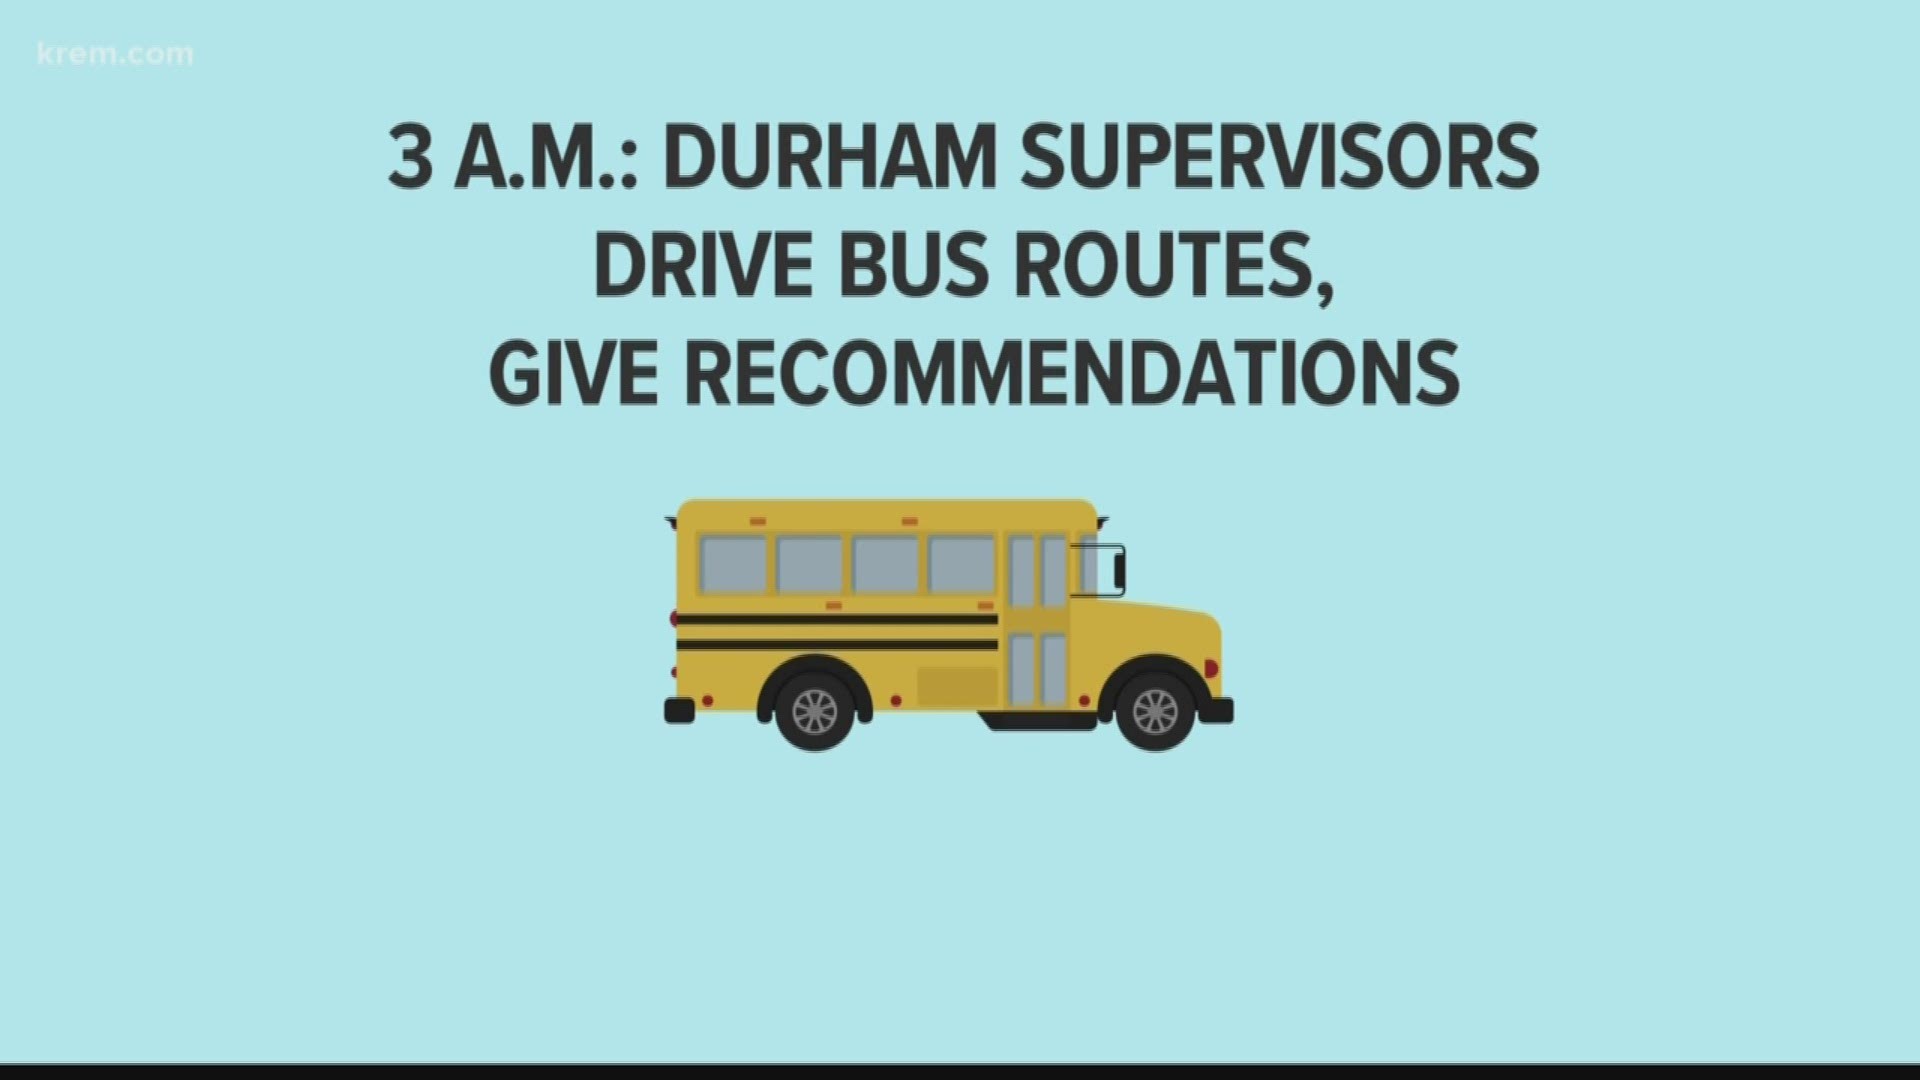 District leaders said the night before school starts, they mobilize a ‘weather alert team' that includes district leaders and officials from Durham Bus Service.